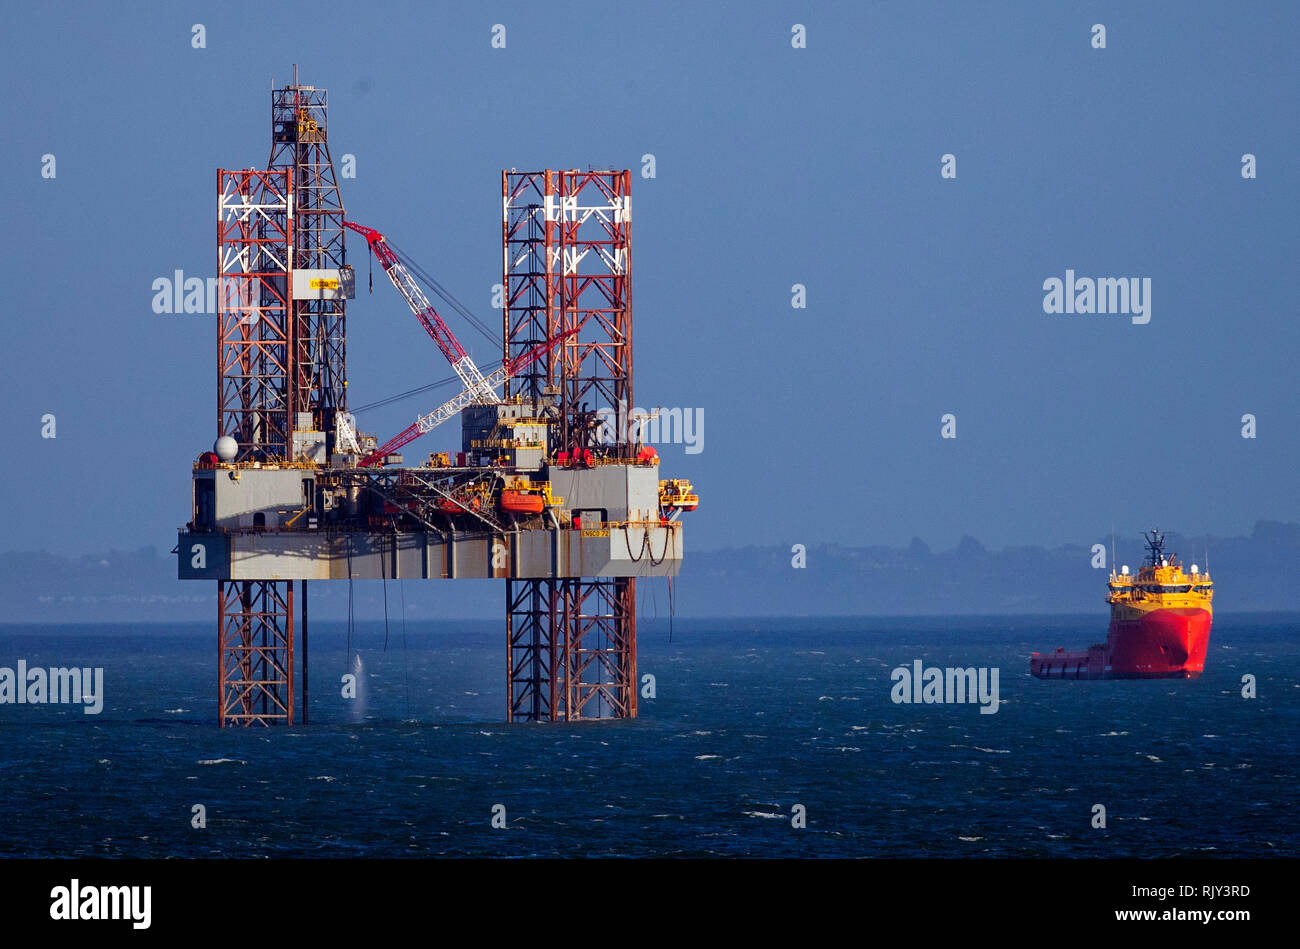 The Ensco 72 Drilling Rig In Poole Bay Off The Coast Of